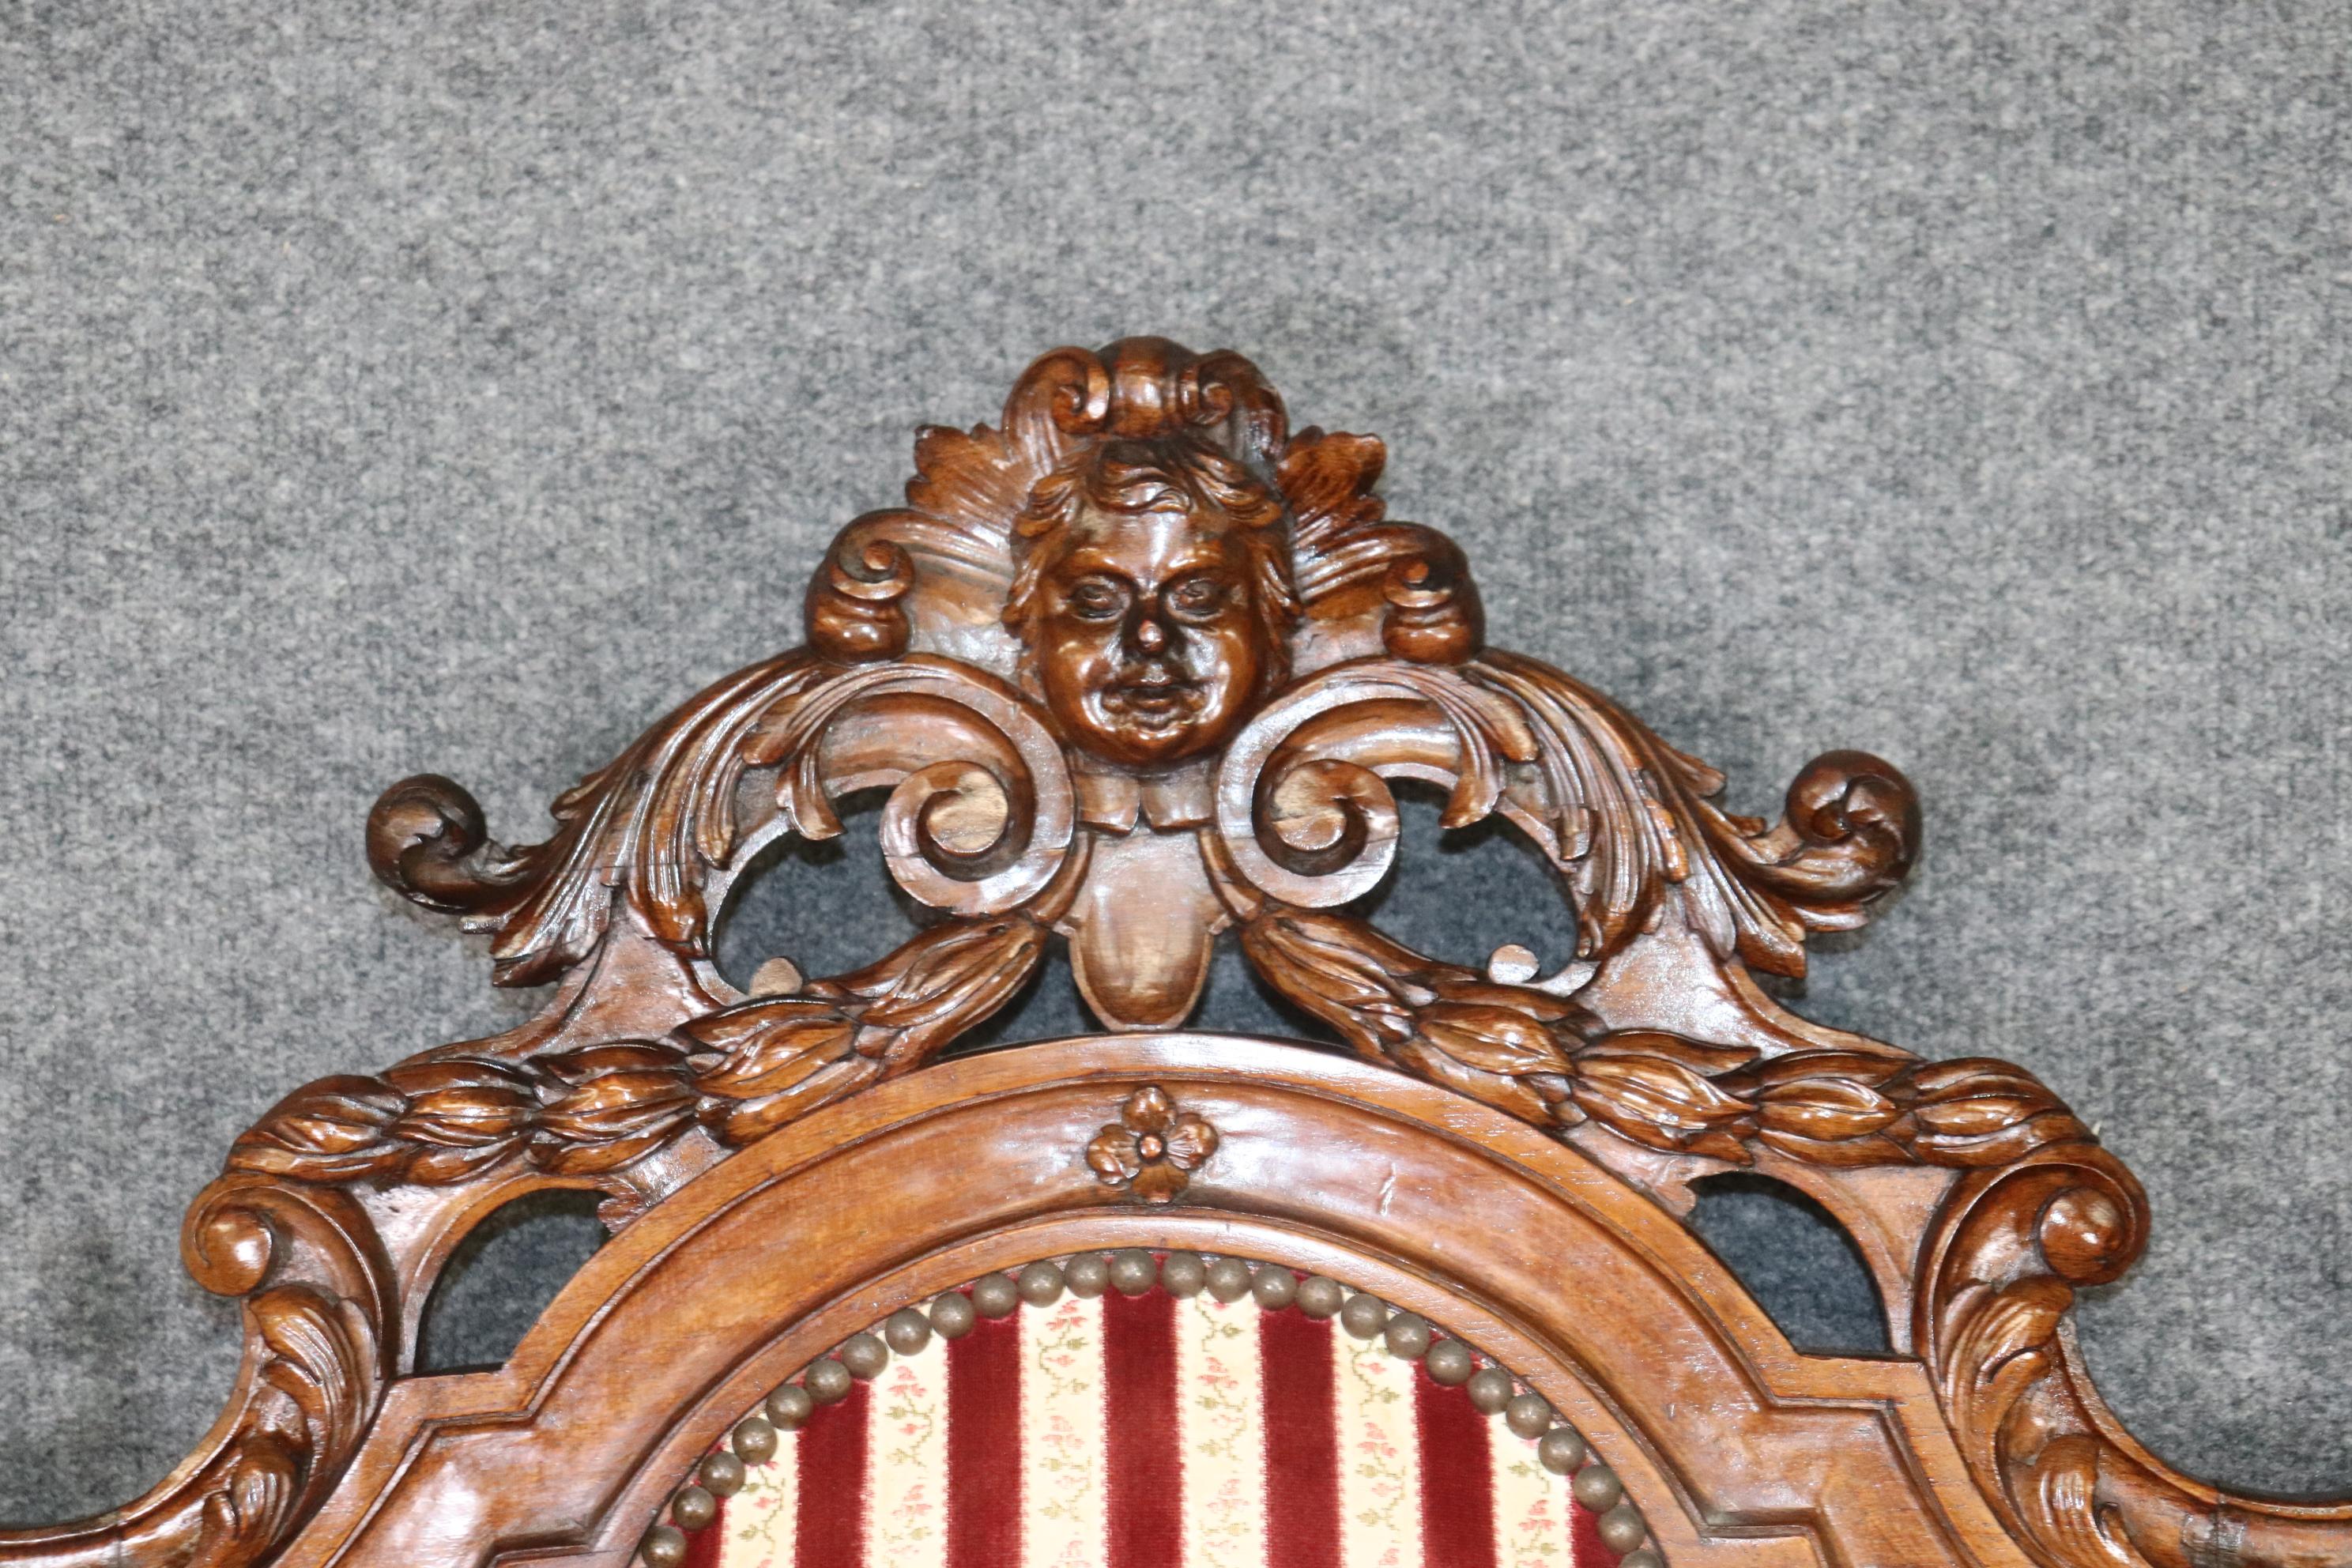 Large Heavily Carved Figural Victorian Walnut Throne Chair with Putti Cherubs  For Sale 6